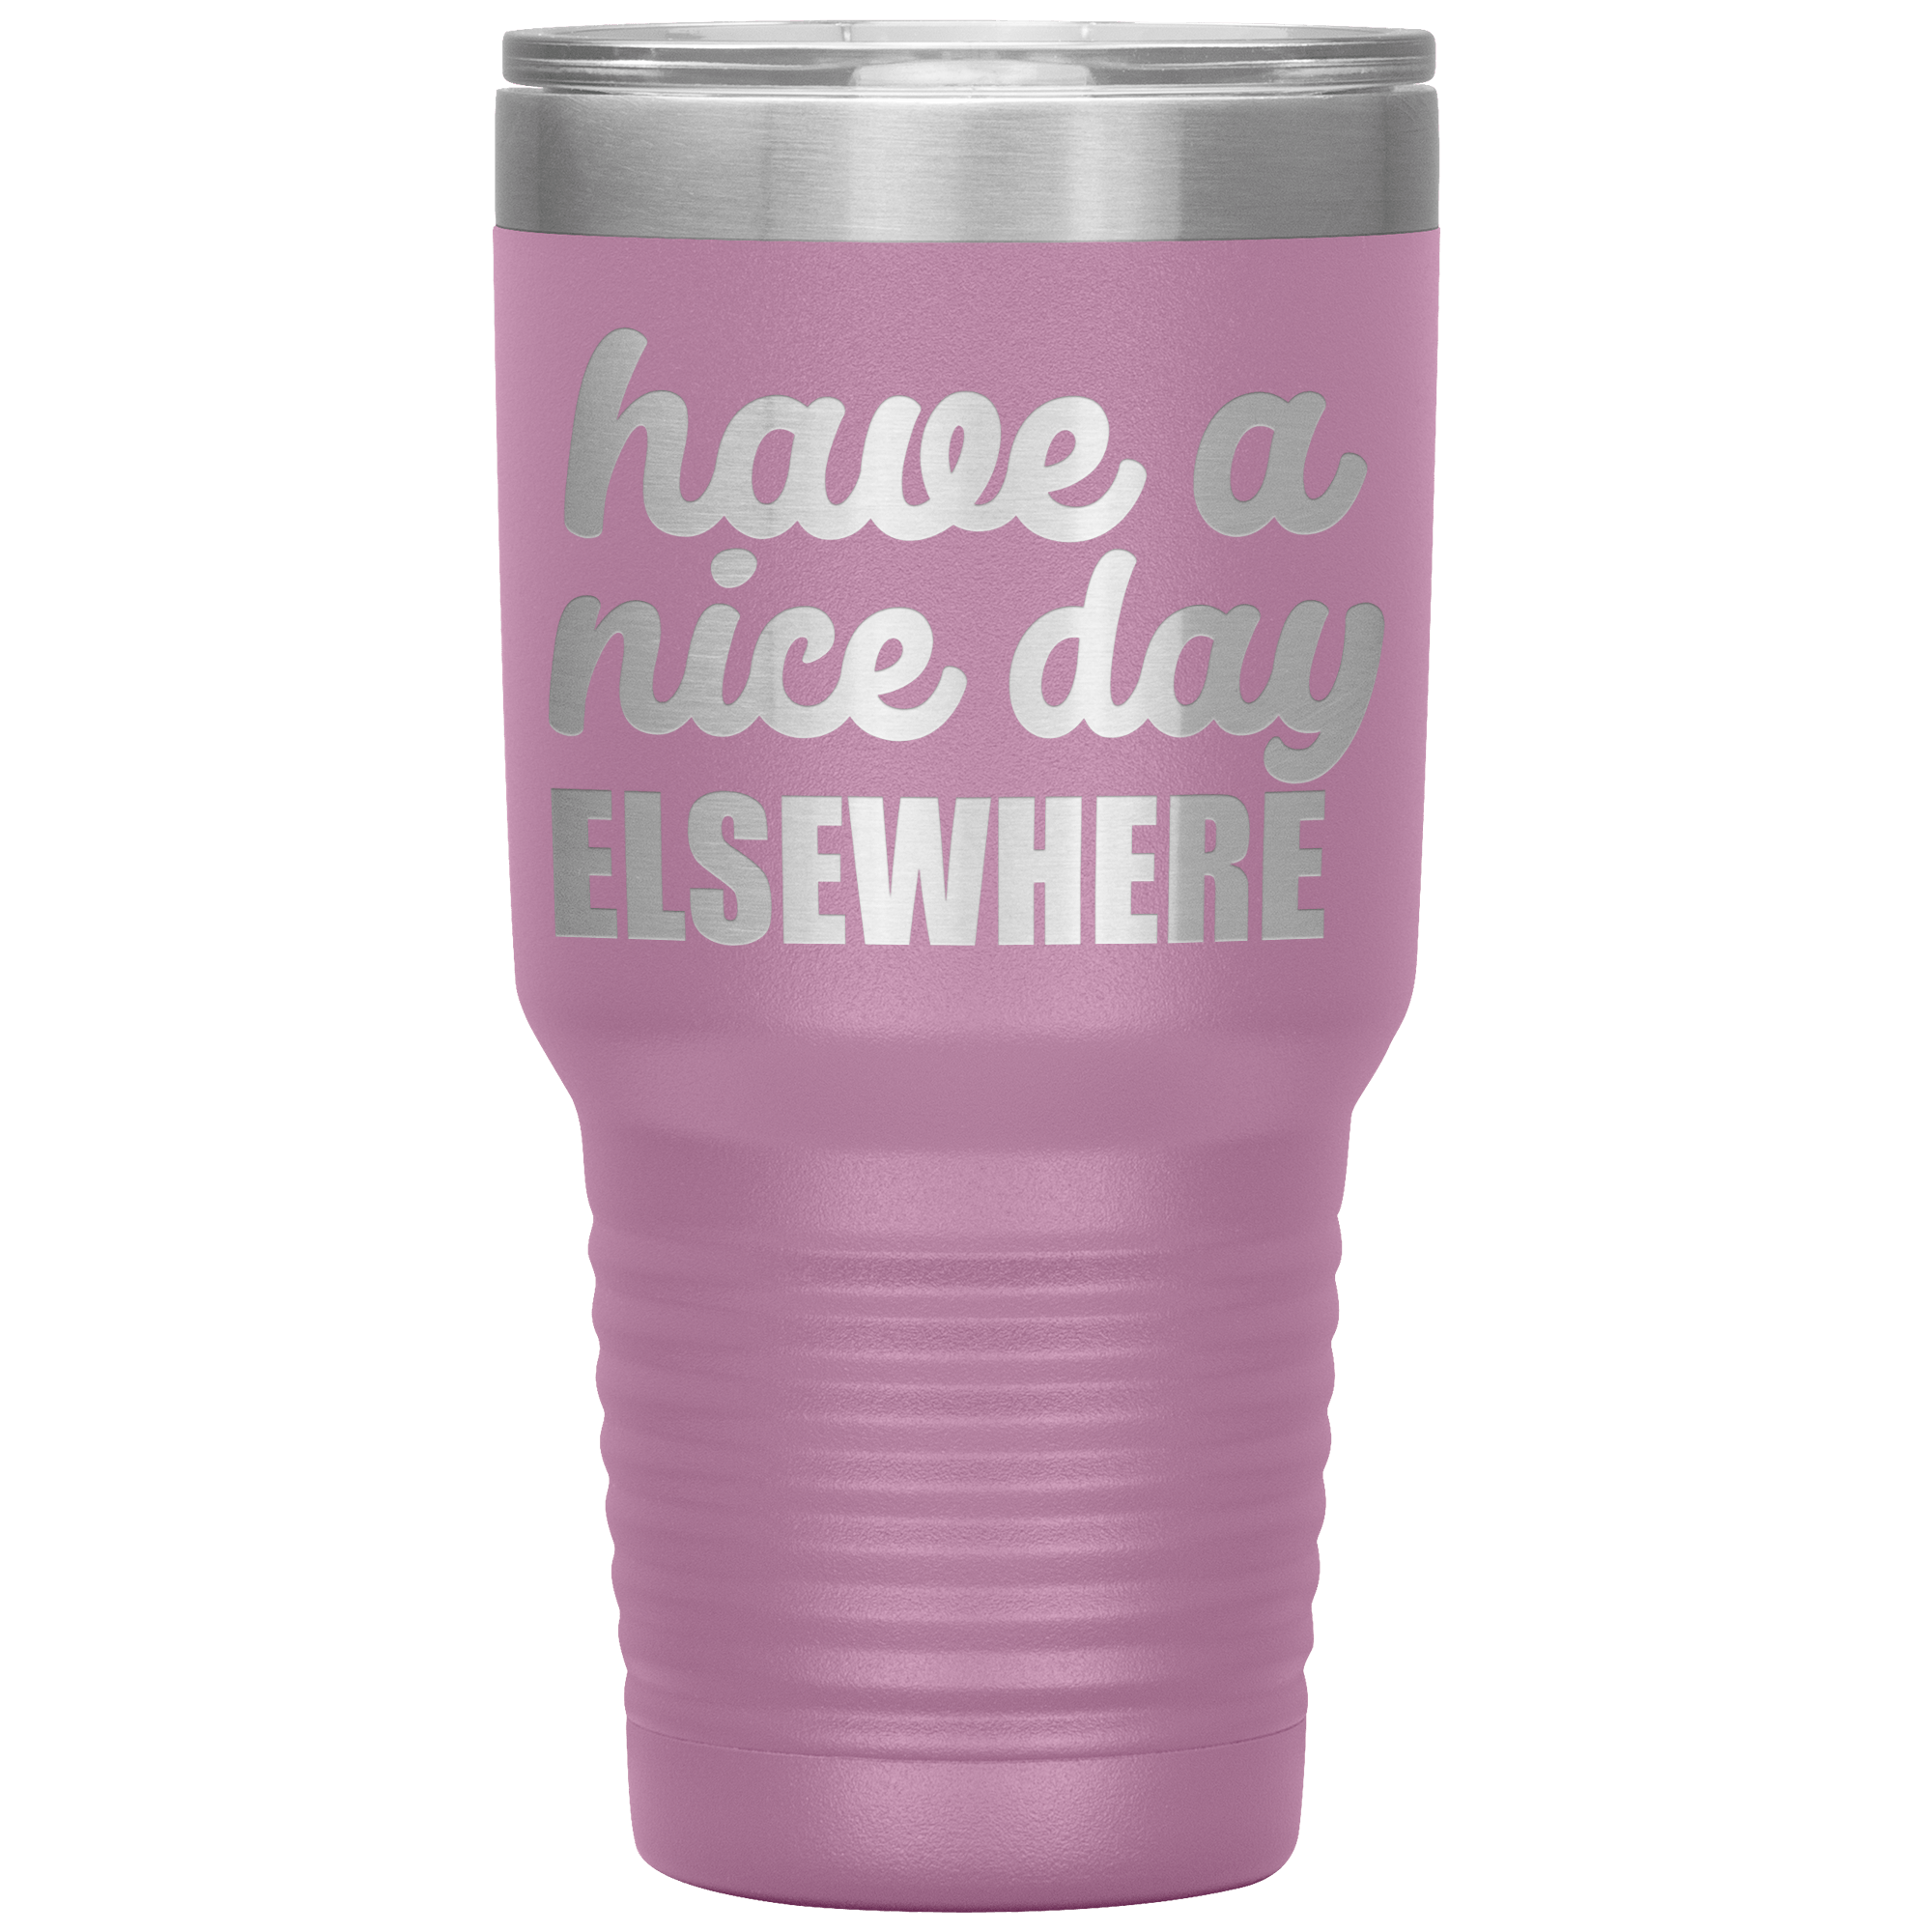 " HAVE A NICE DAY ELSEWHERE " TUMBLER